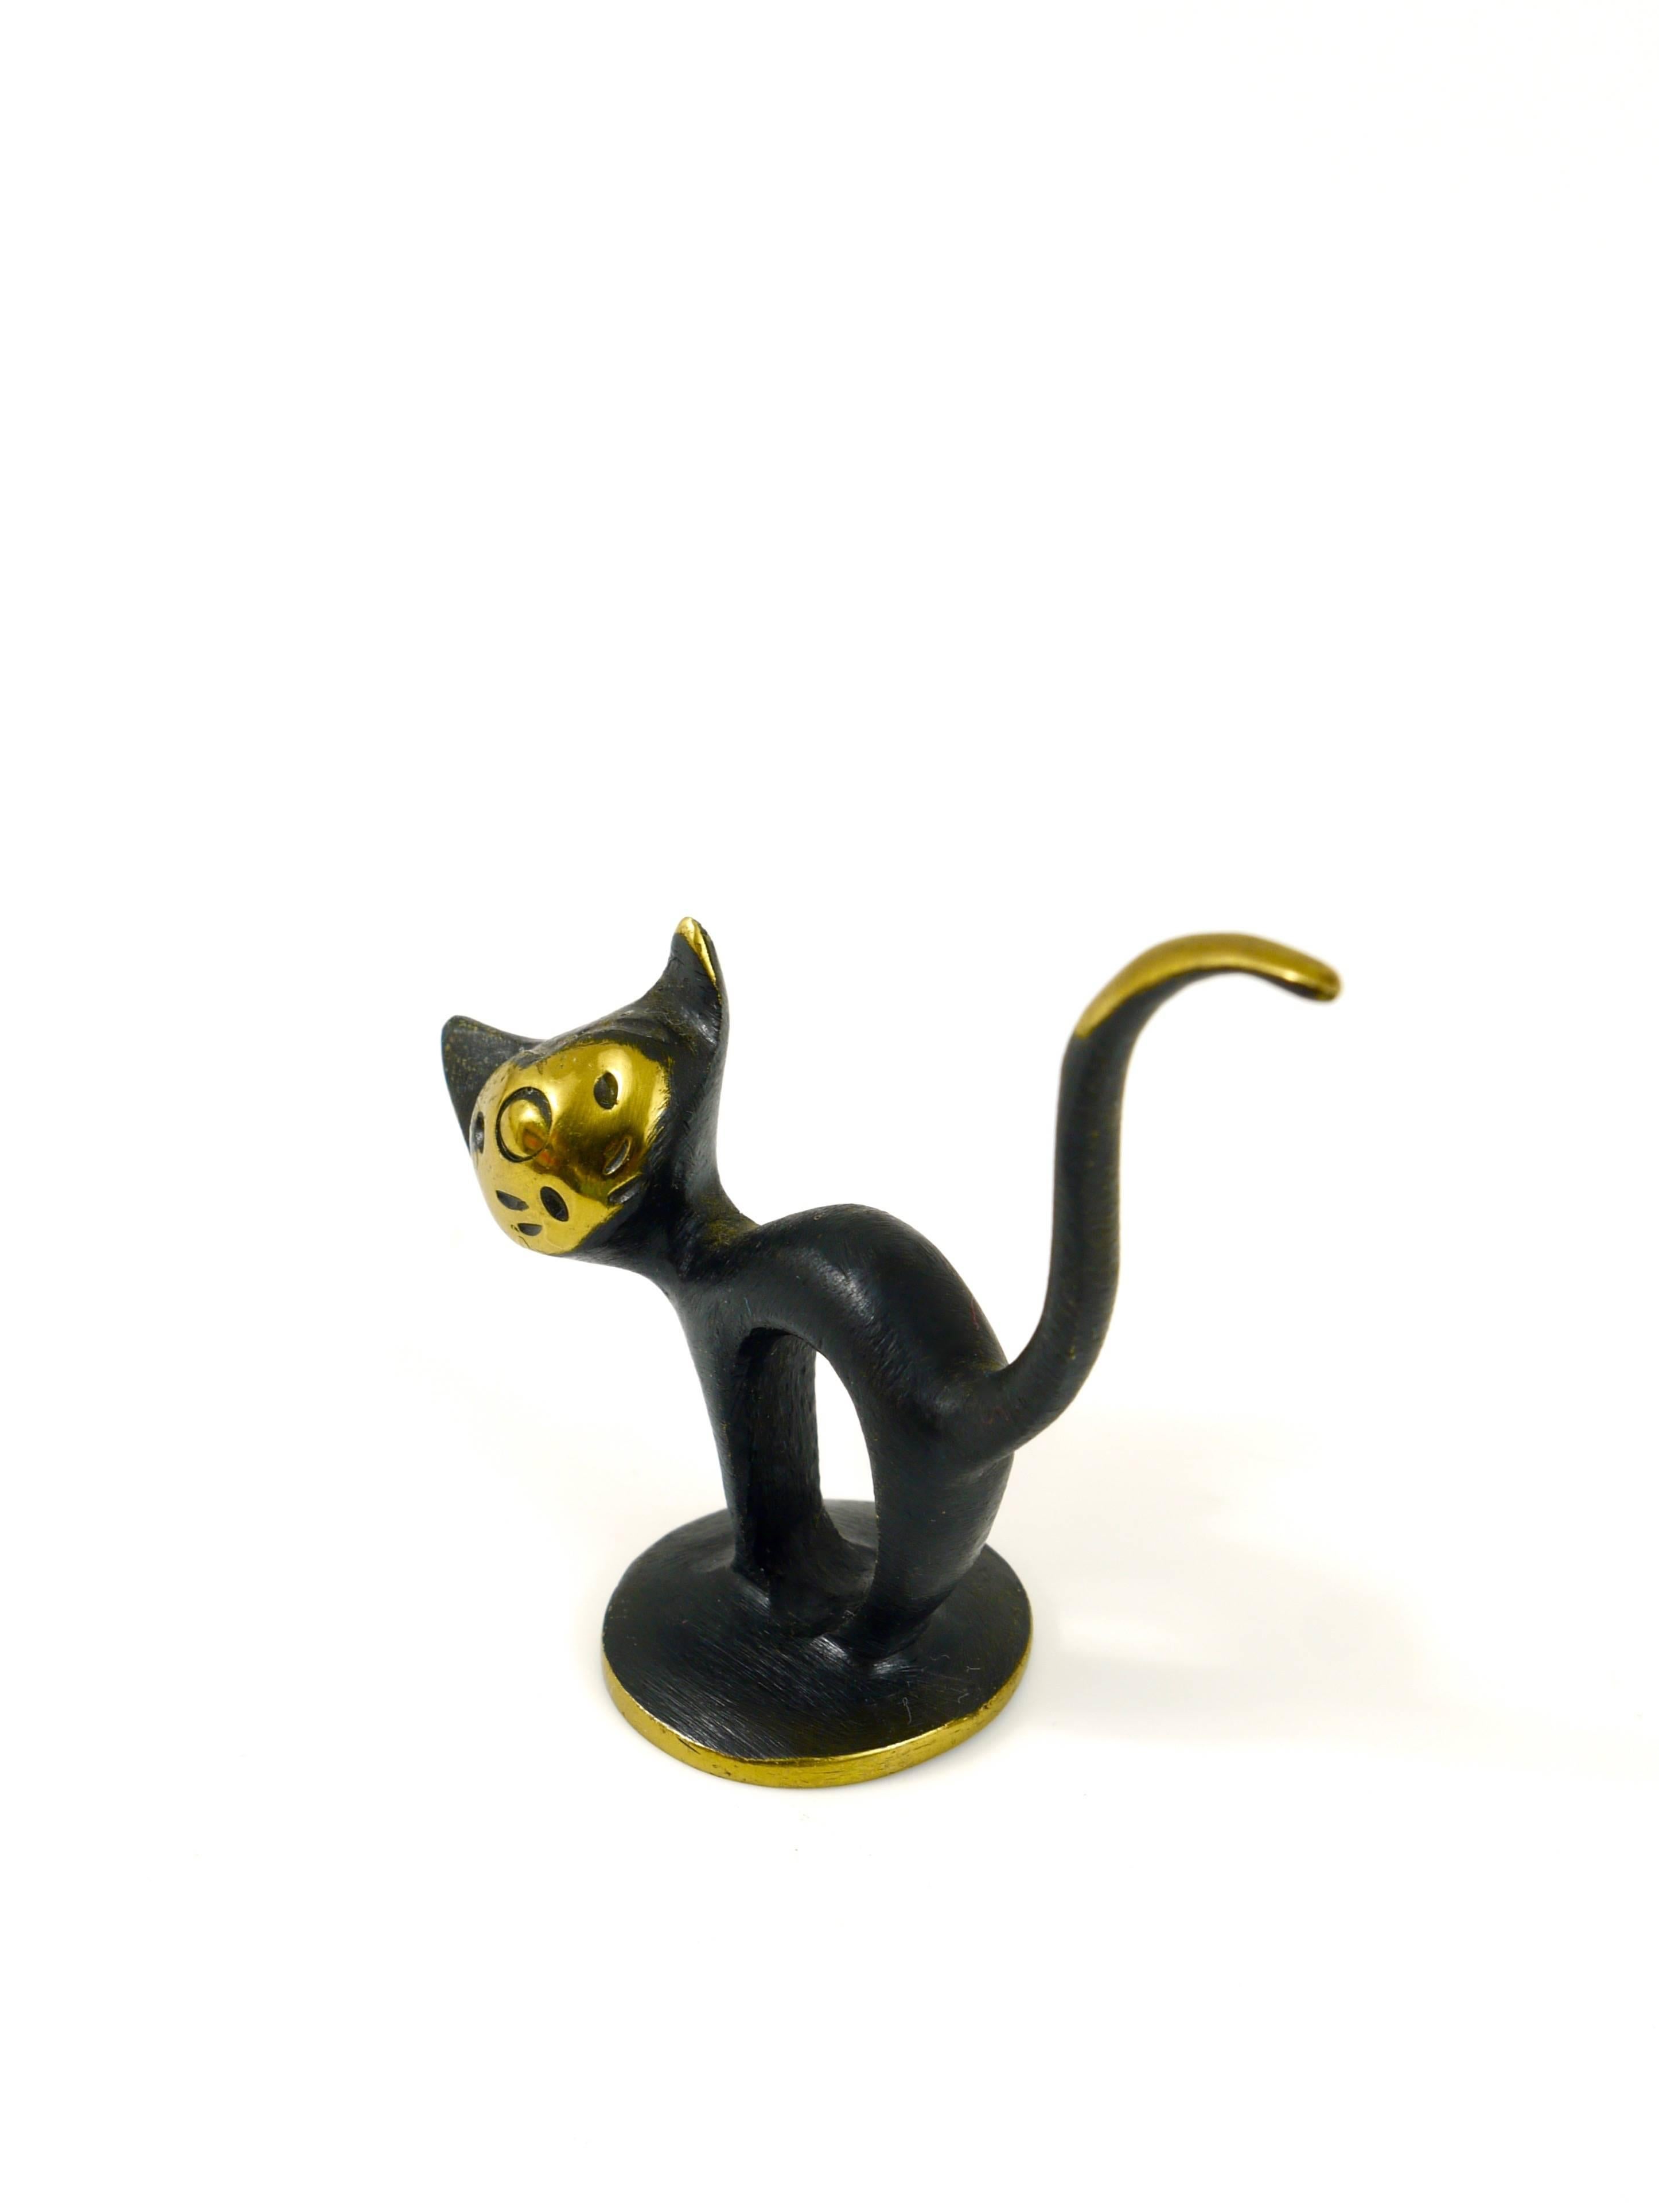 A beautiful cat figurine, made of brass designed by Walter Bosse, executed by Hertha Baller, Austria in the 1950s, marked. In very good condition.